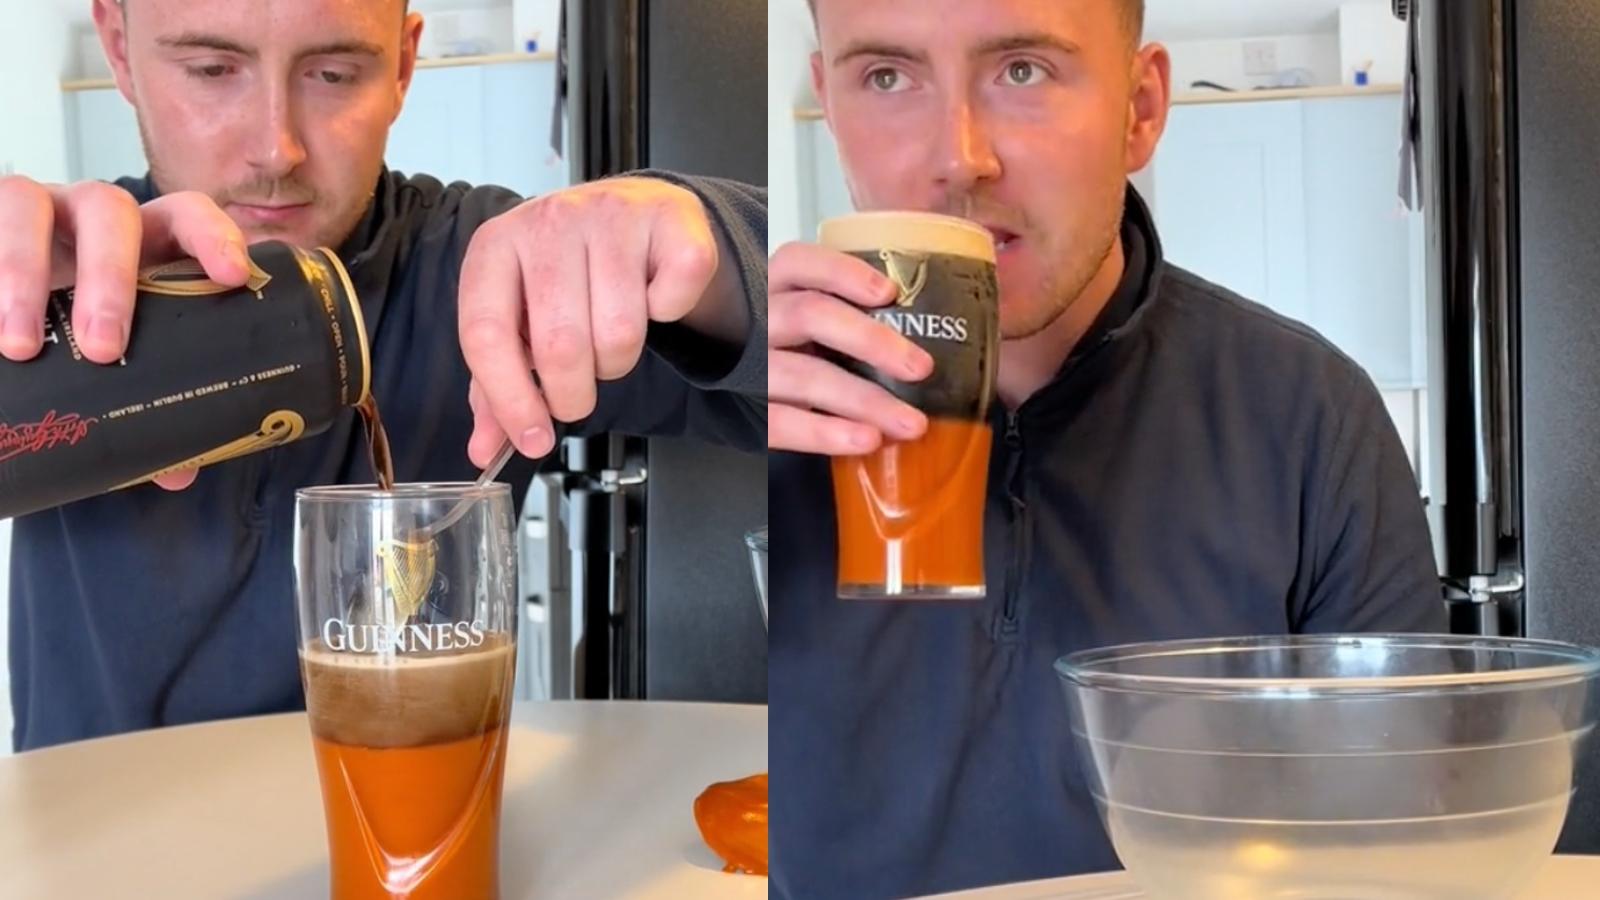 Man drinks Guiness and tomato soup